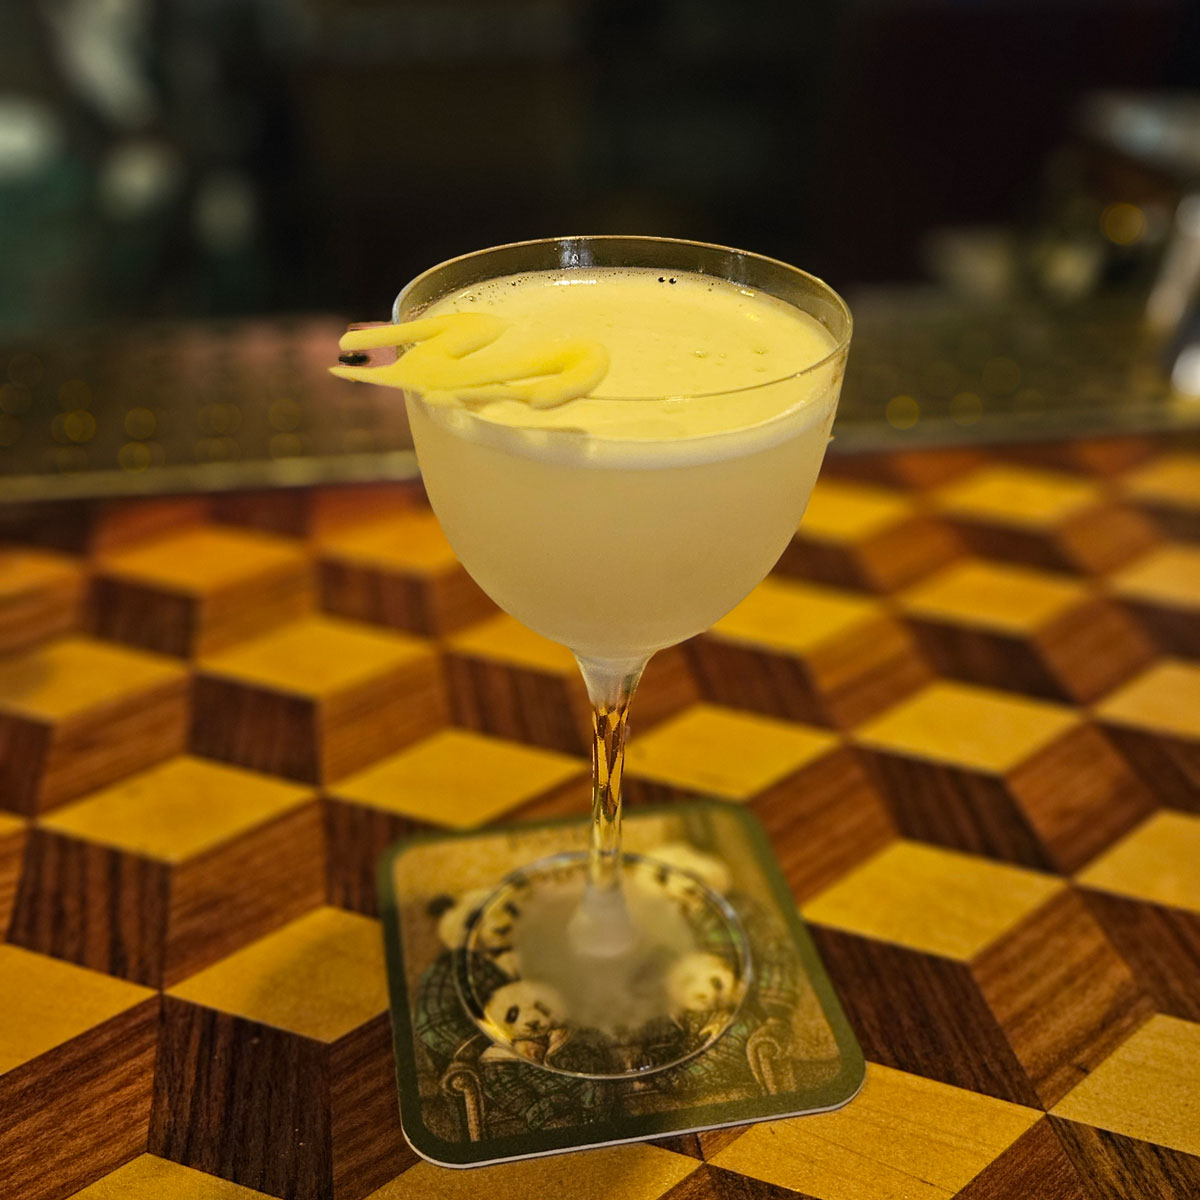 A pale yellow cocktail